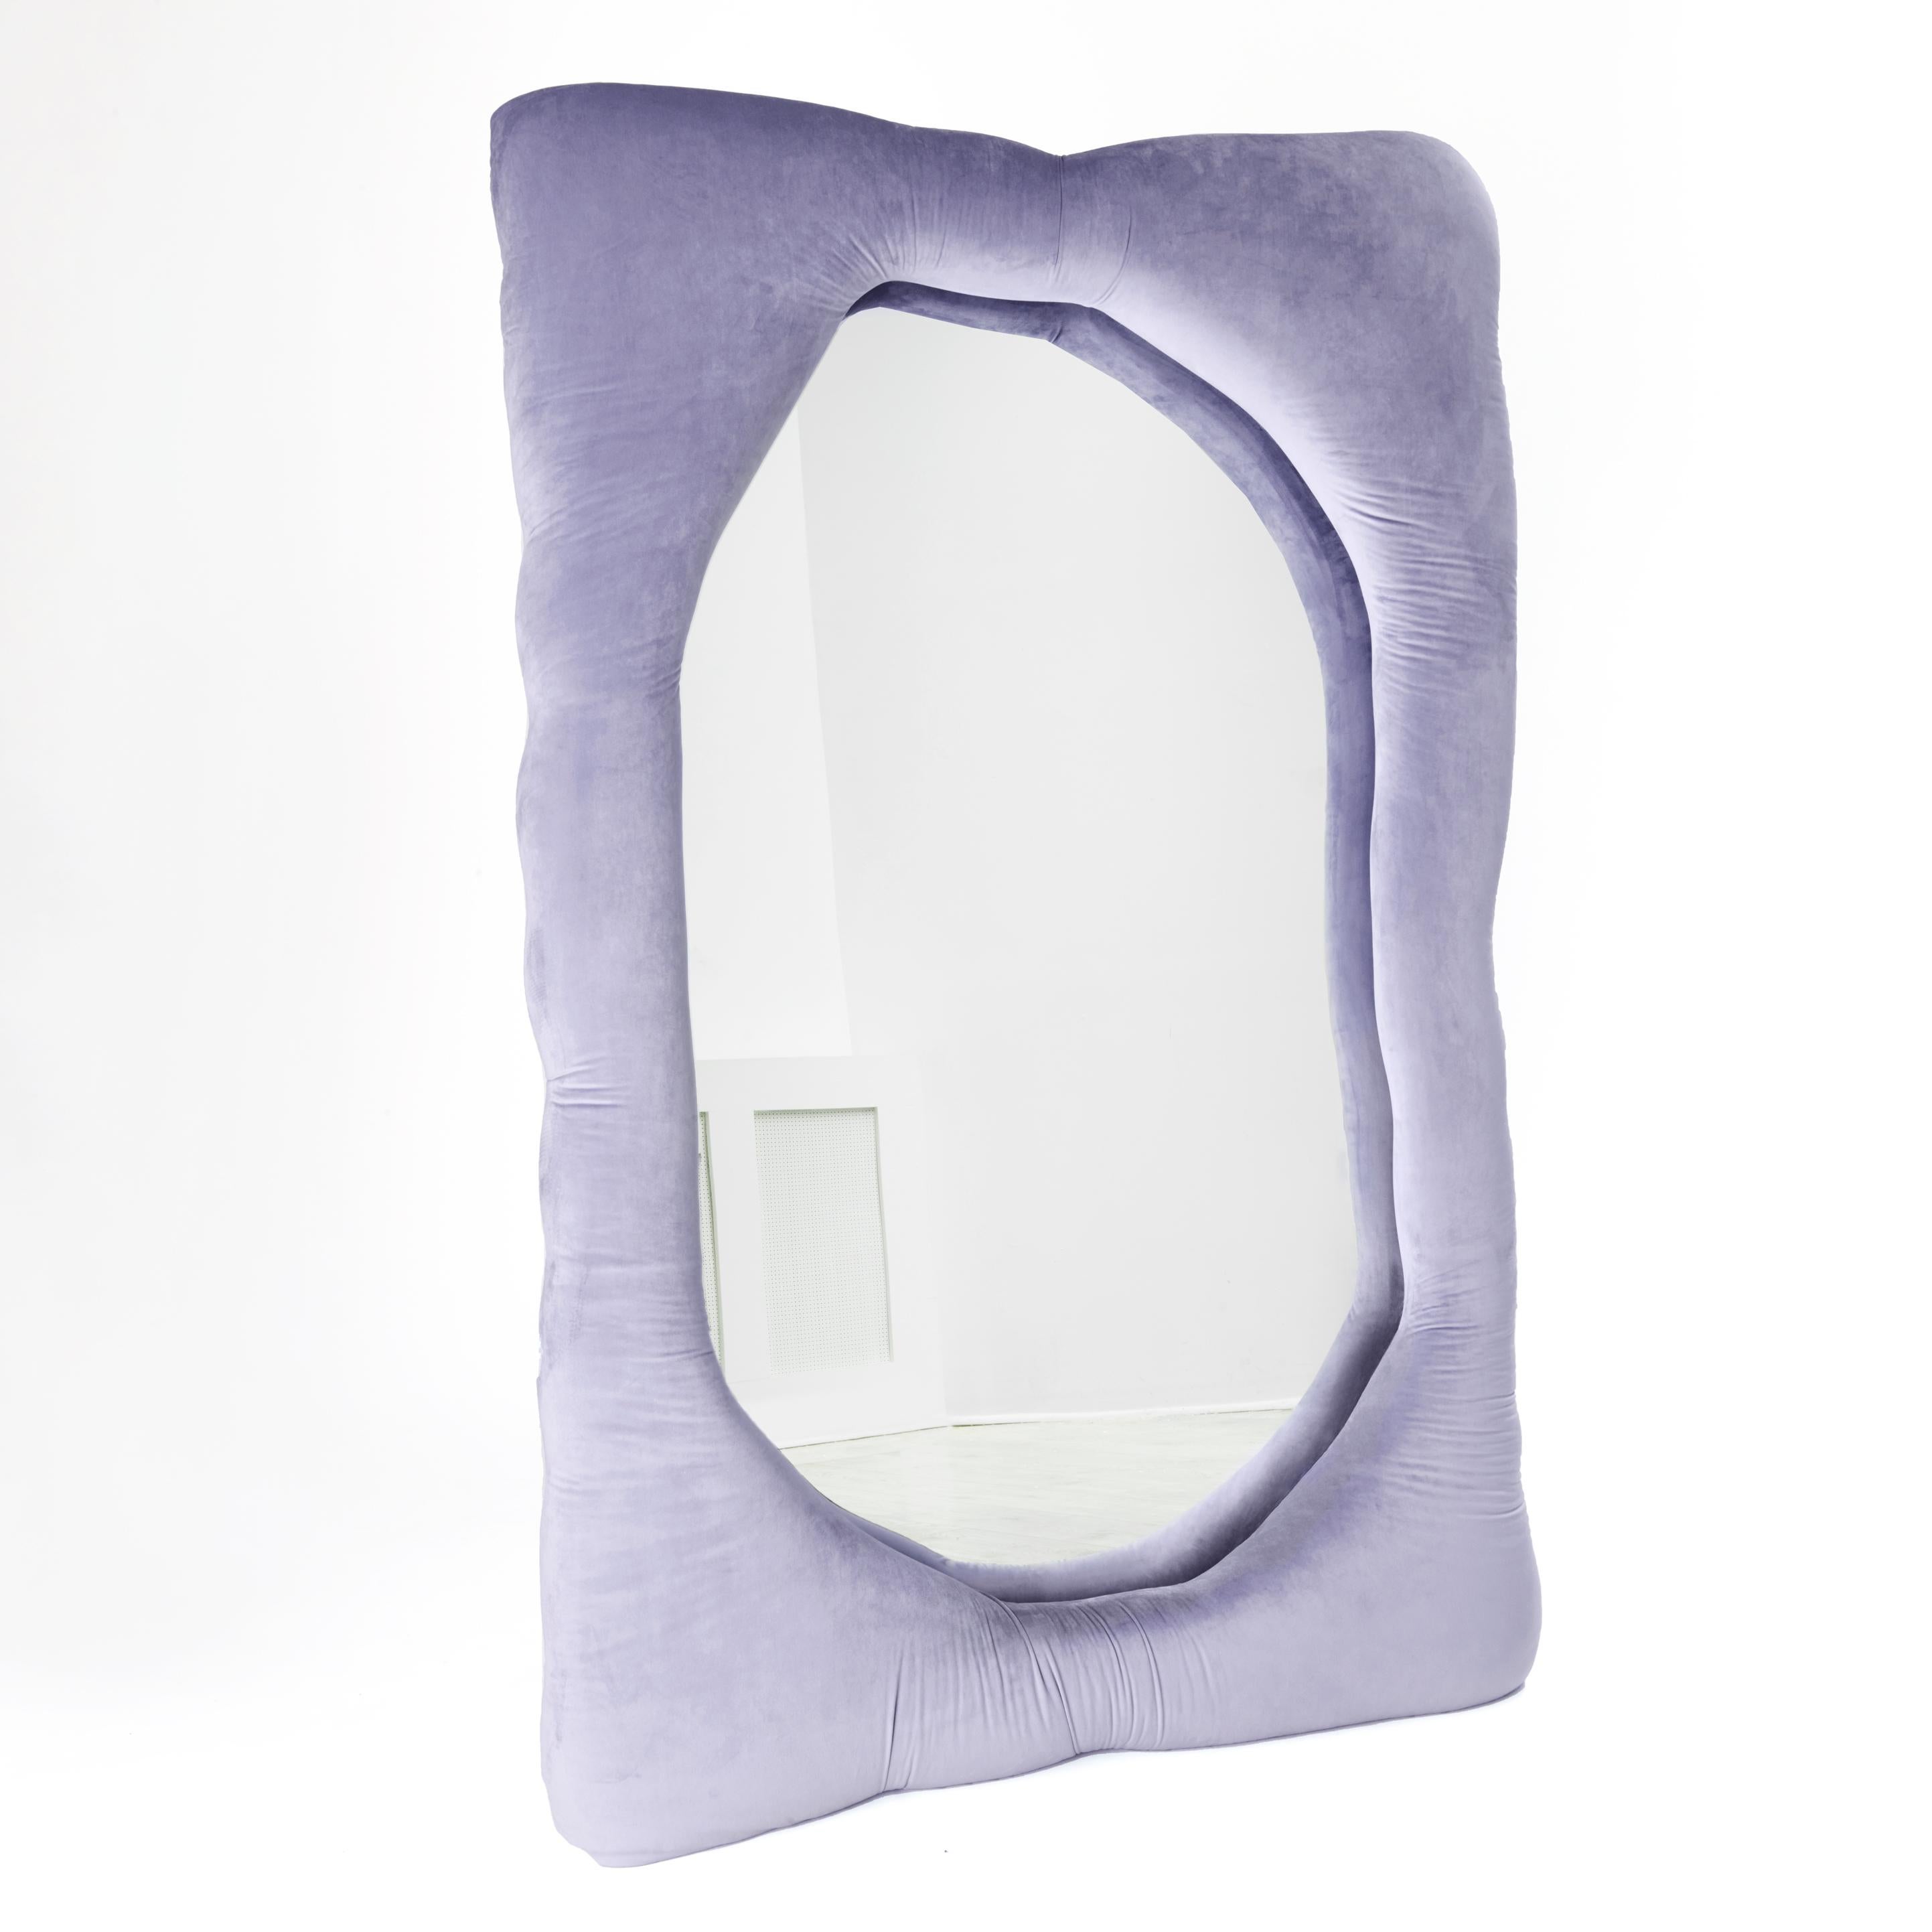 Biomorphic Mirror by Brandi Howe

Velvet fabric, glass, wood

Pictured: 68 x 45 x 5 in.

This mirror is fully customizable in multiple color, fabric and sizing options.

Other size available: 60 x 15 x 5 in.



Shipping is not included. See our